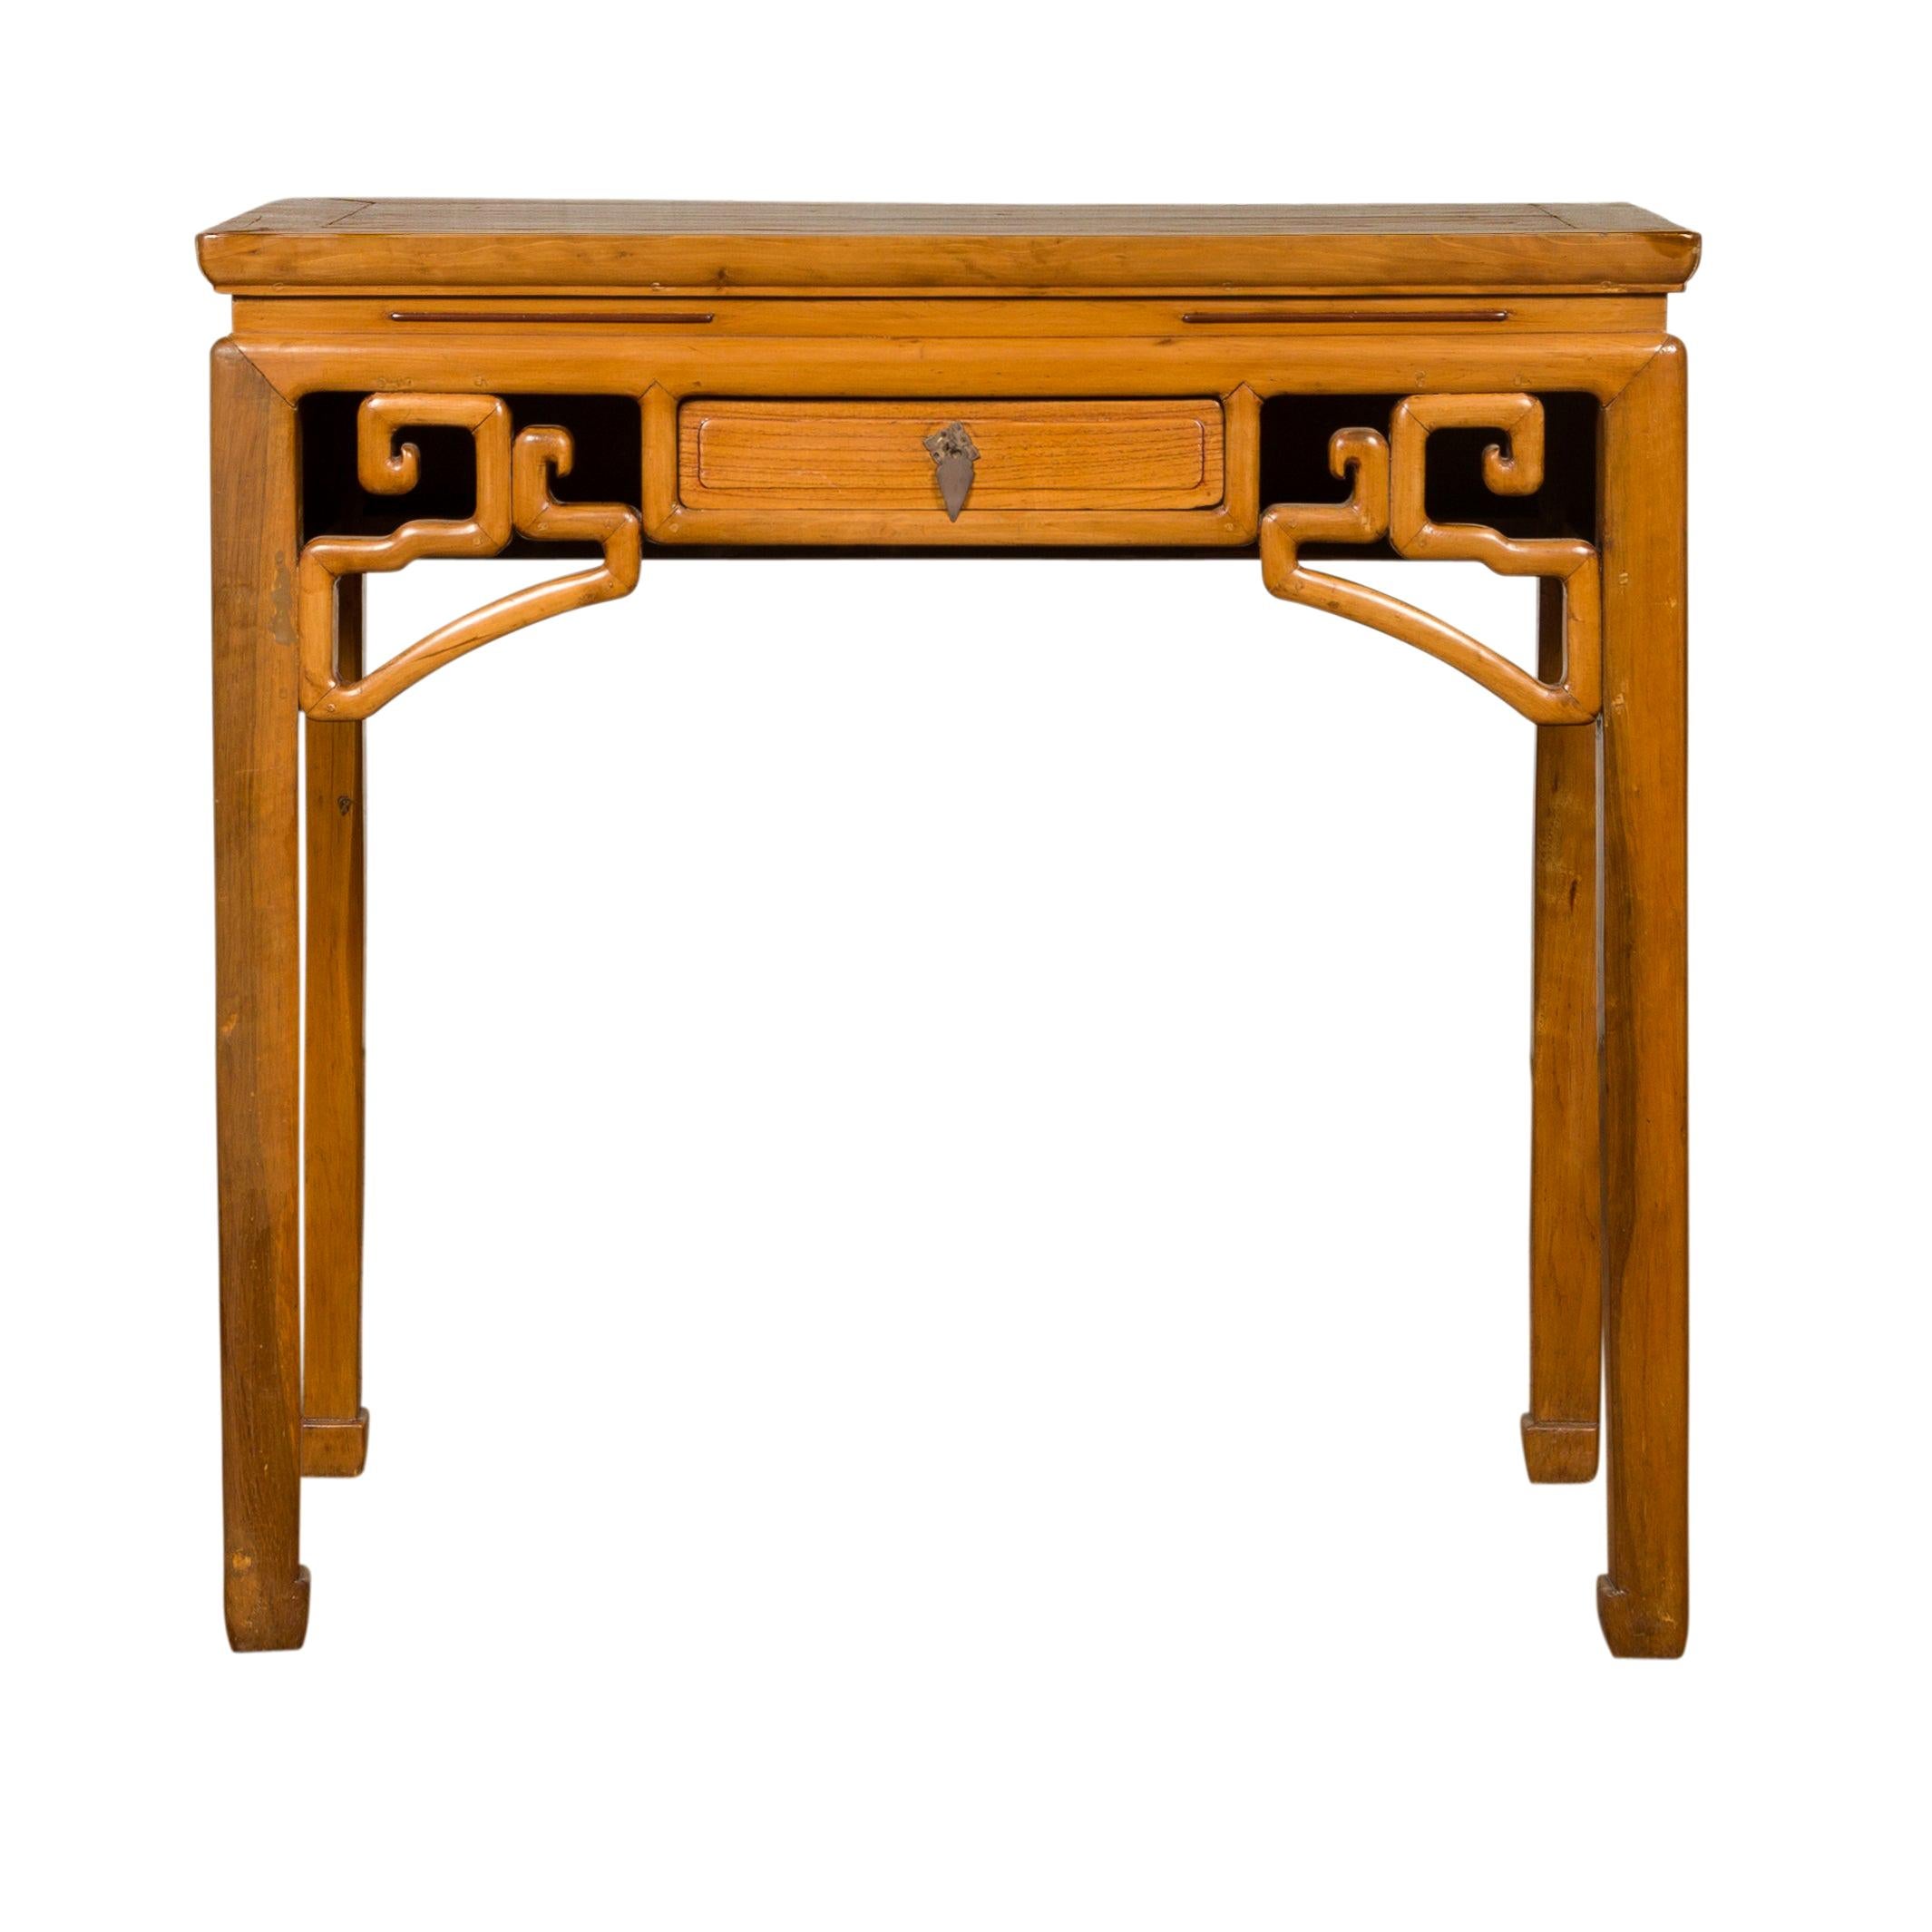 Chinese Ming Dynasty Style Waisted Desk with Geometric Apron and Single Drawer